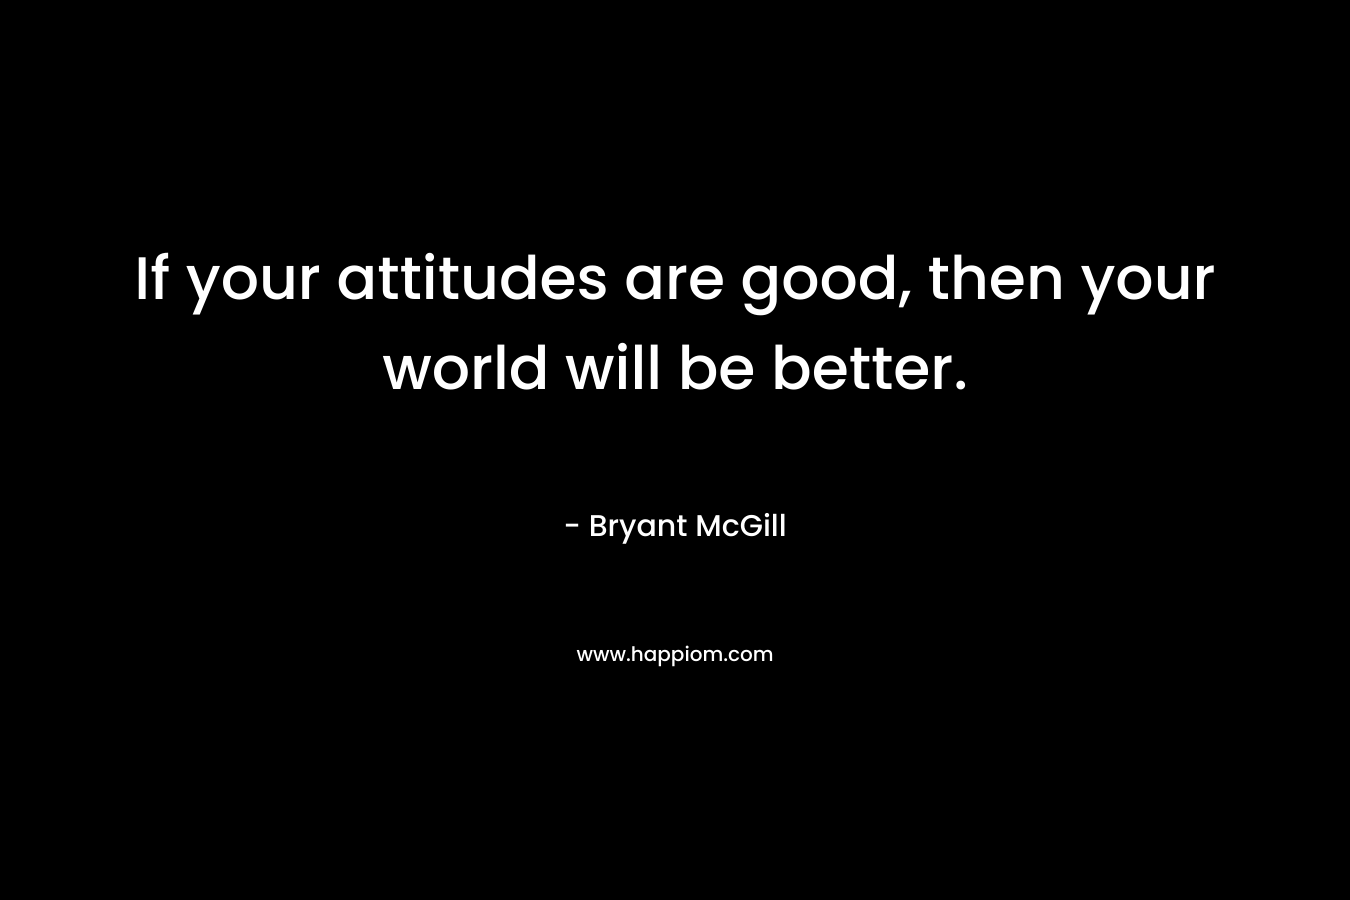 If your attitudes are good, then your world will be better. – Bryant McGill